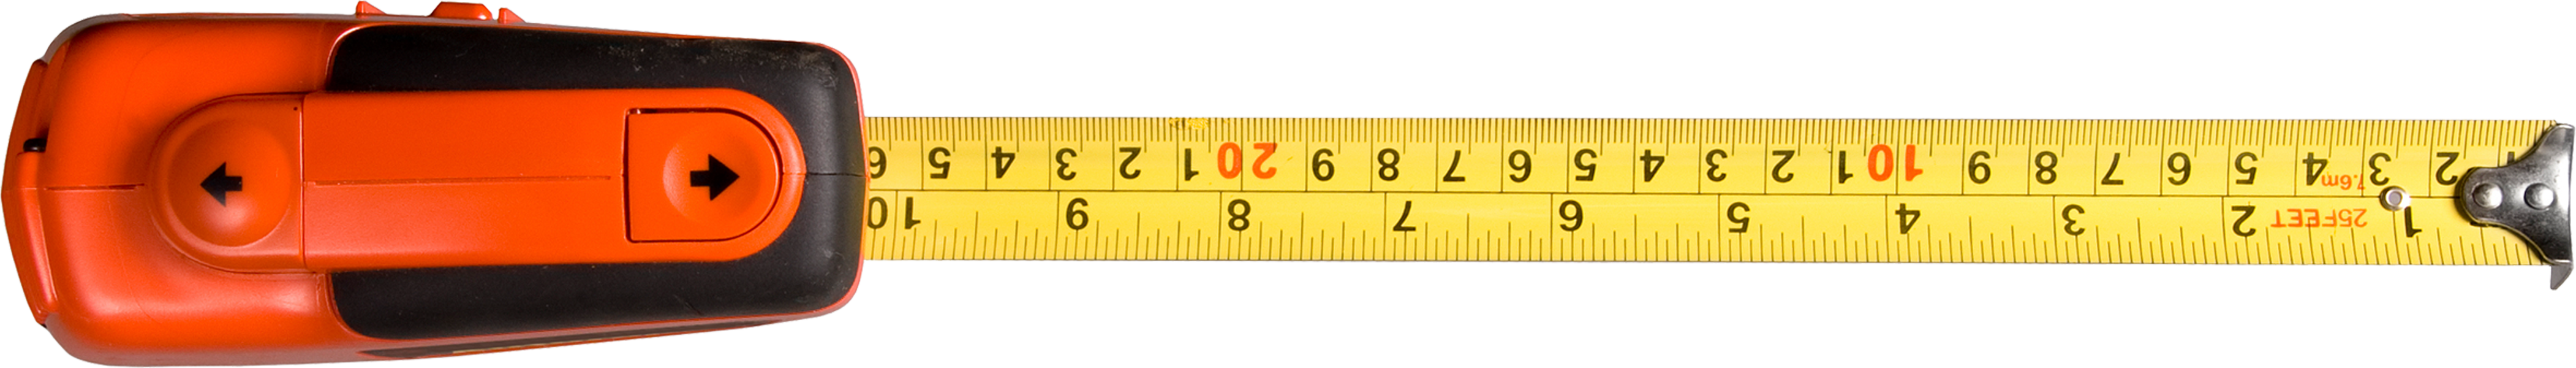 Clipart ruler three. Measure tape png images